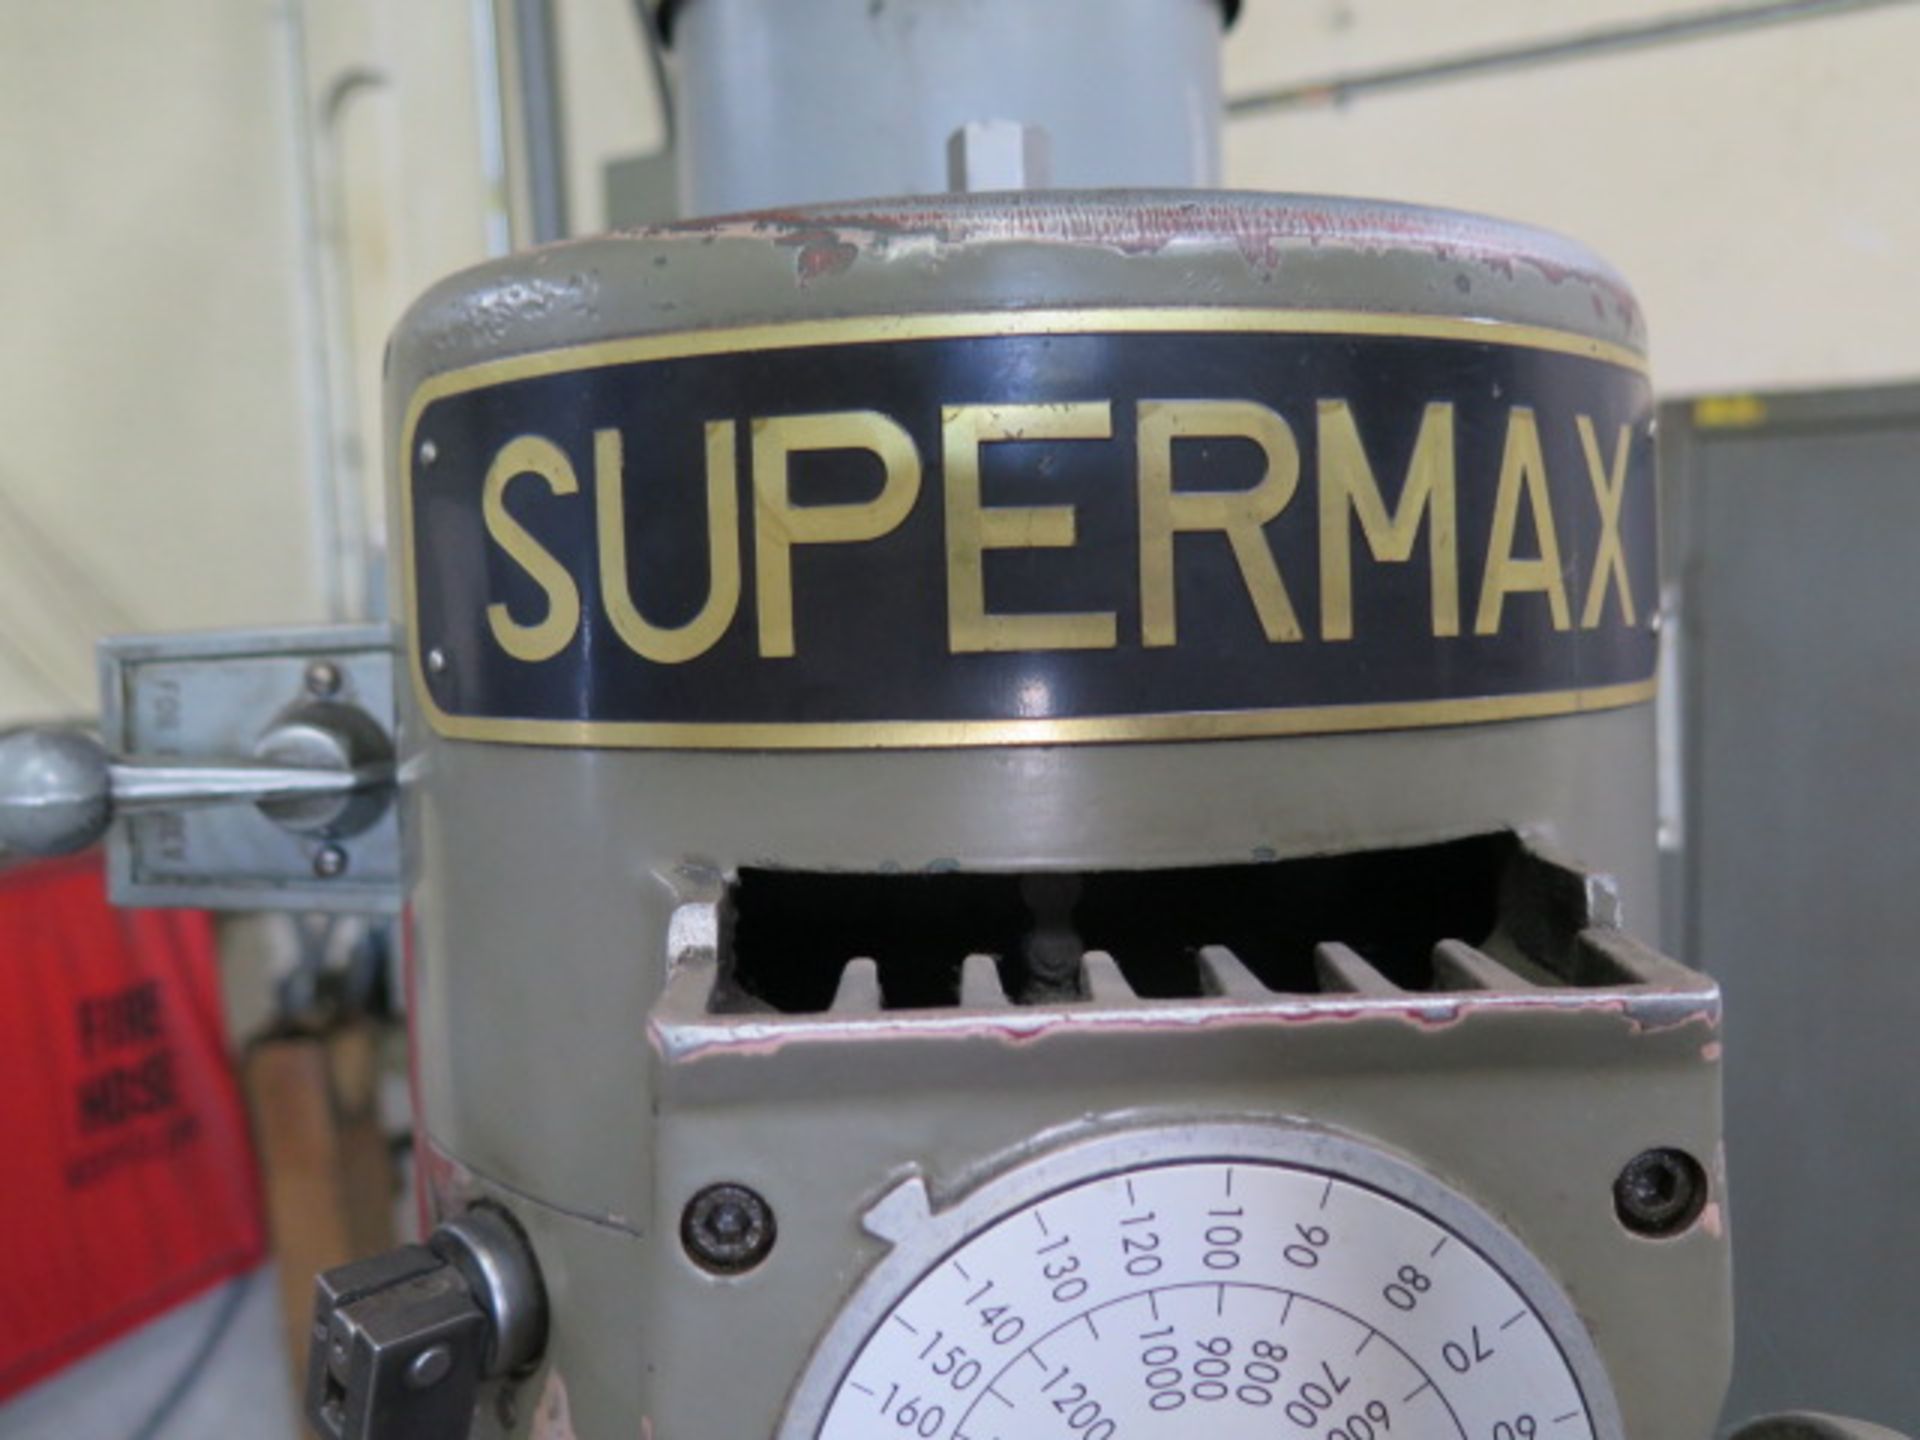 Supermax YC-1 1/2VA Vertical Mill s/n 1010525 w/ 60-4200 Dial Change RPM, Chrome Ways, PF SOLD AS IS - Image 9 of 9